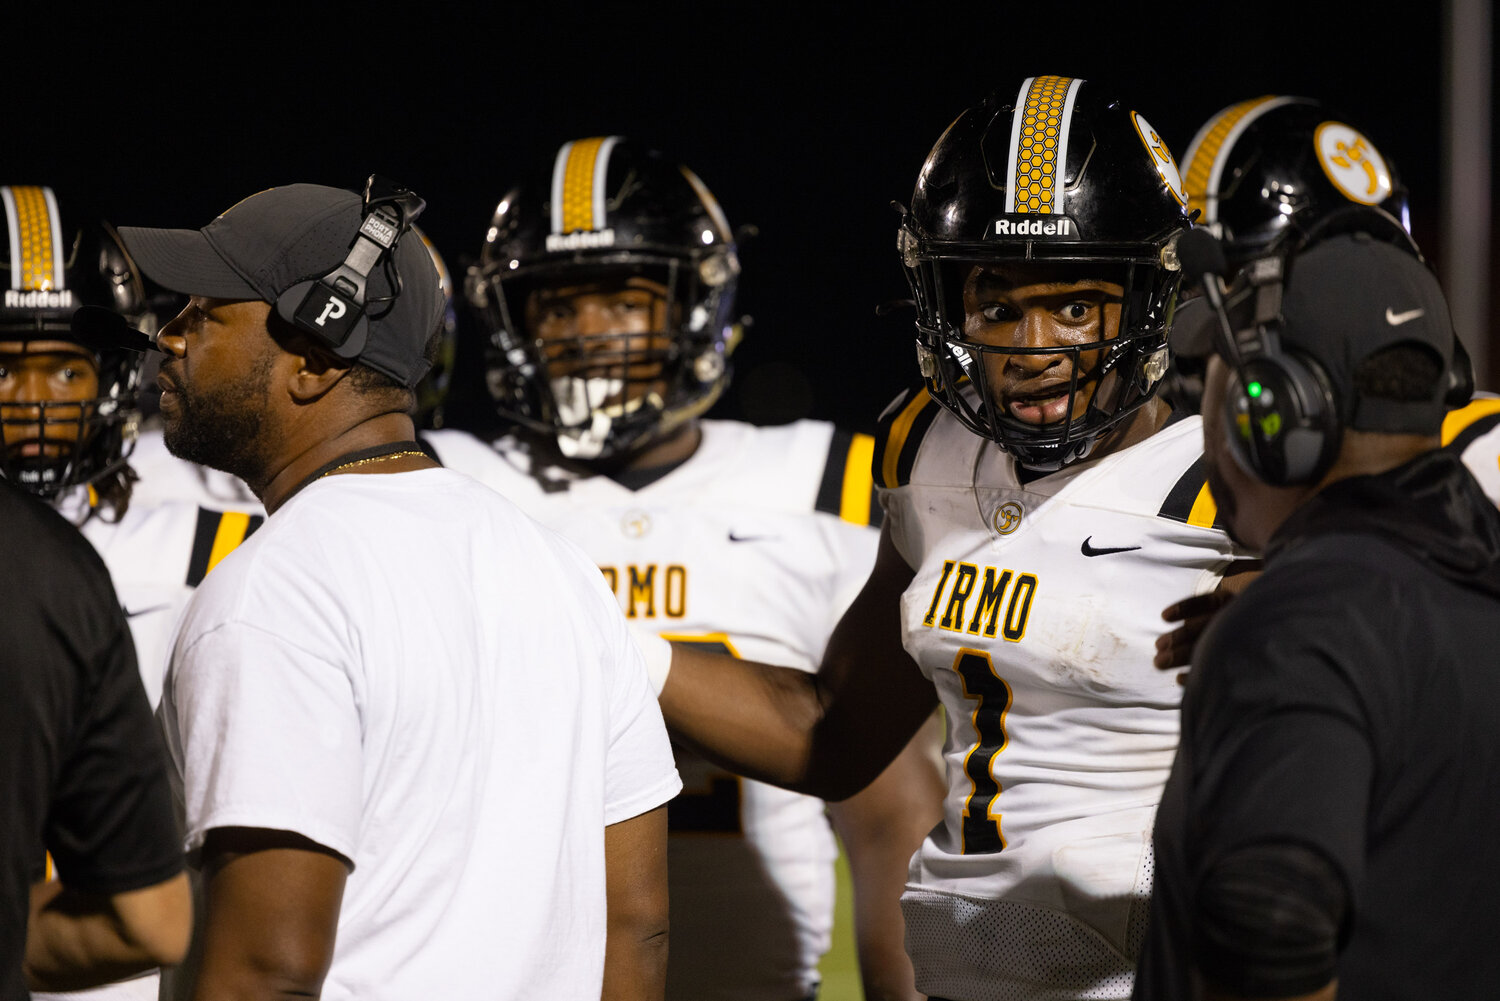 Irmo quarterback A.J. Brand speaks with a coach on the sidelines during the second quarter.